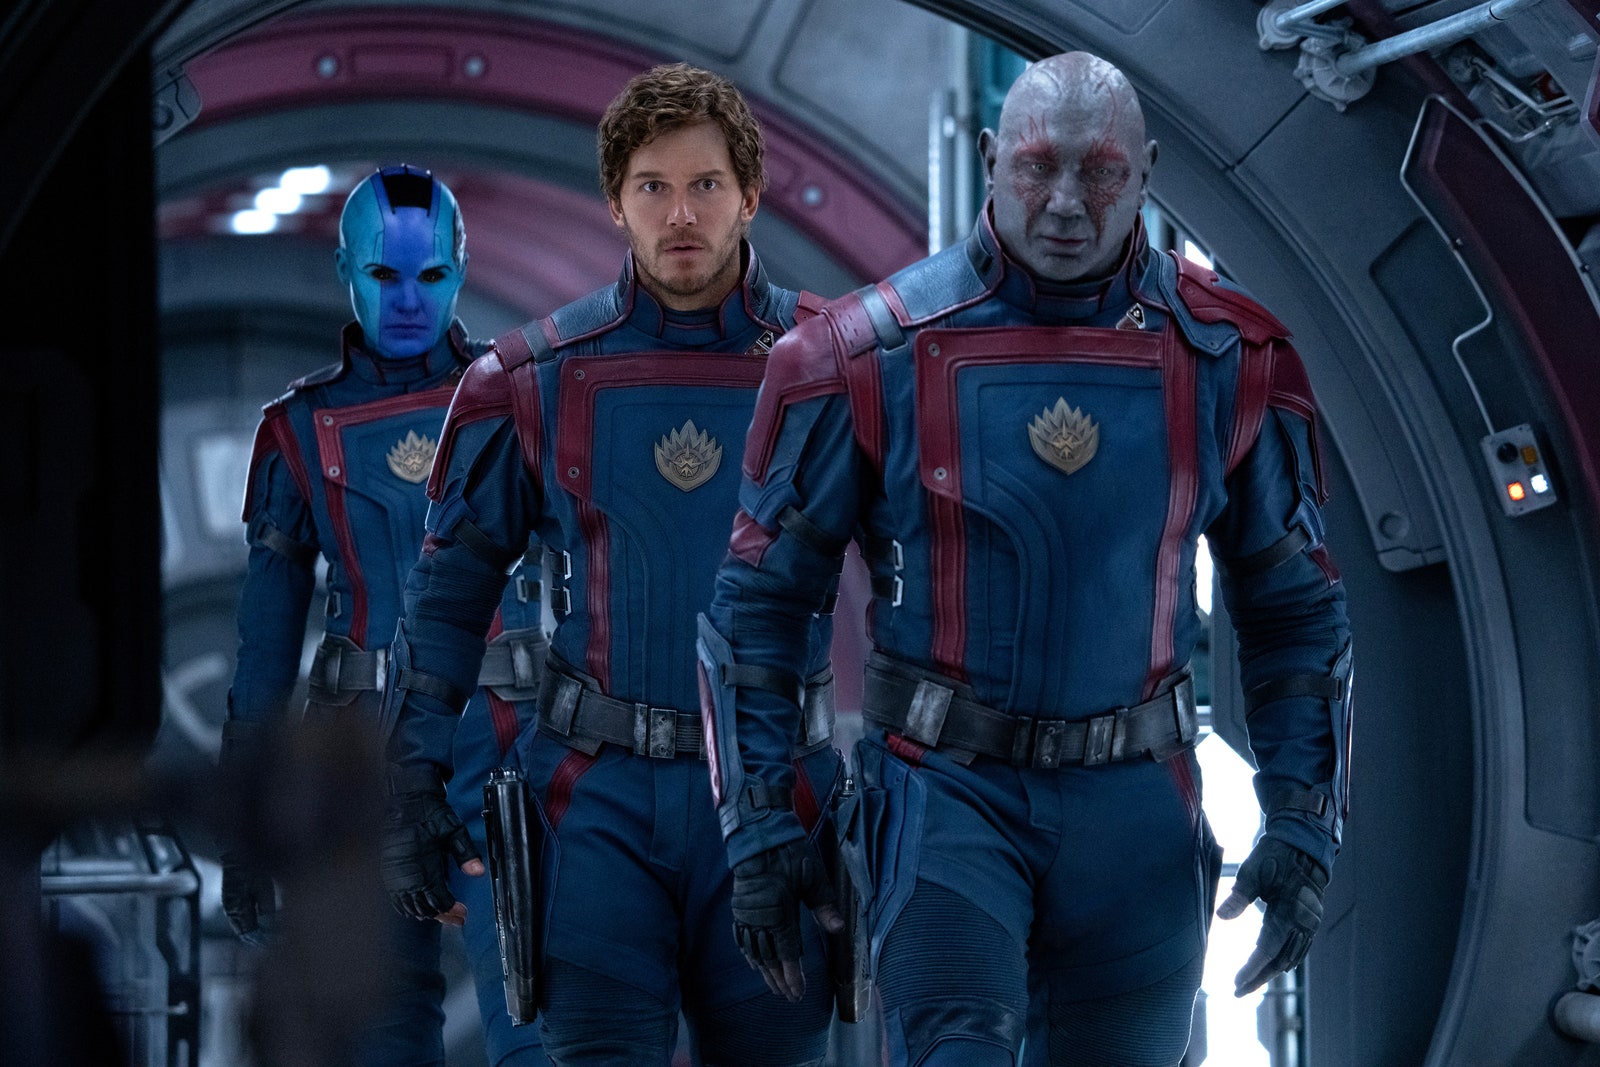 Still from the movie 'The Guardians of the Galaxy Vol. 3' featuring three characters walking down a spaceship tunnel